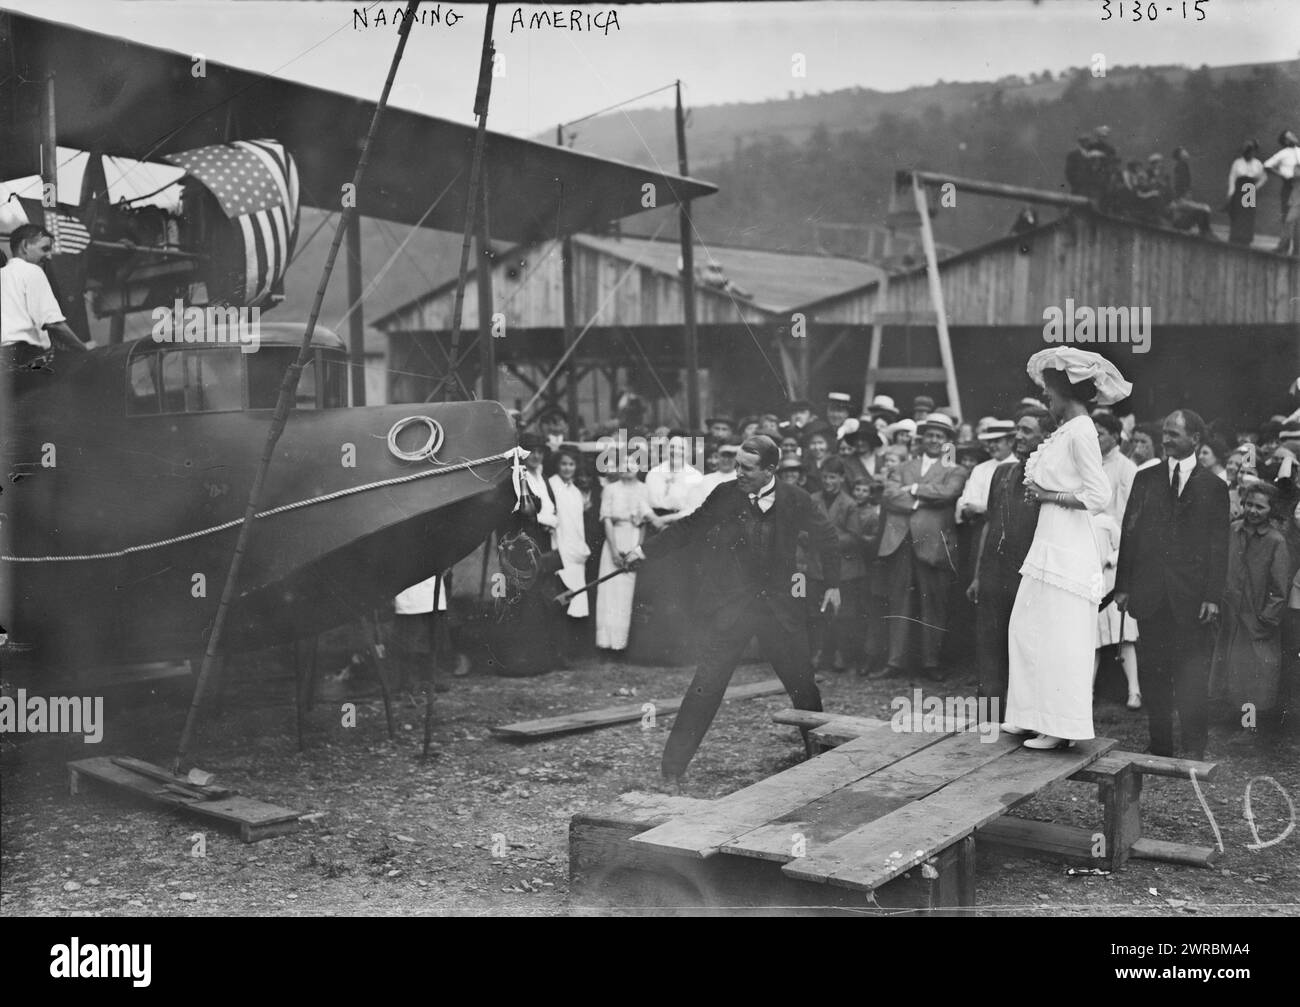 Naming 'America', Photograph shows the christening and launch of the Curtiss Model H Flying Boat airplane 'America' on June 22, 1914 in Hammondsport, New York. Aviator John Cyril Porte is using a sledgehammer to smash the champagne bottle as Katherine Masson and builder Glenn Curtiss (standing behind Masson) look on., 1914 June 22, Glass negatives, 1 negative: glass Stock Photo